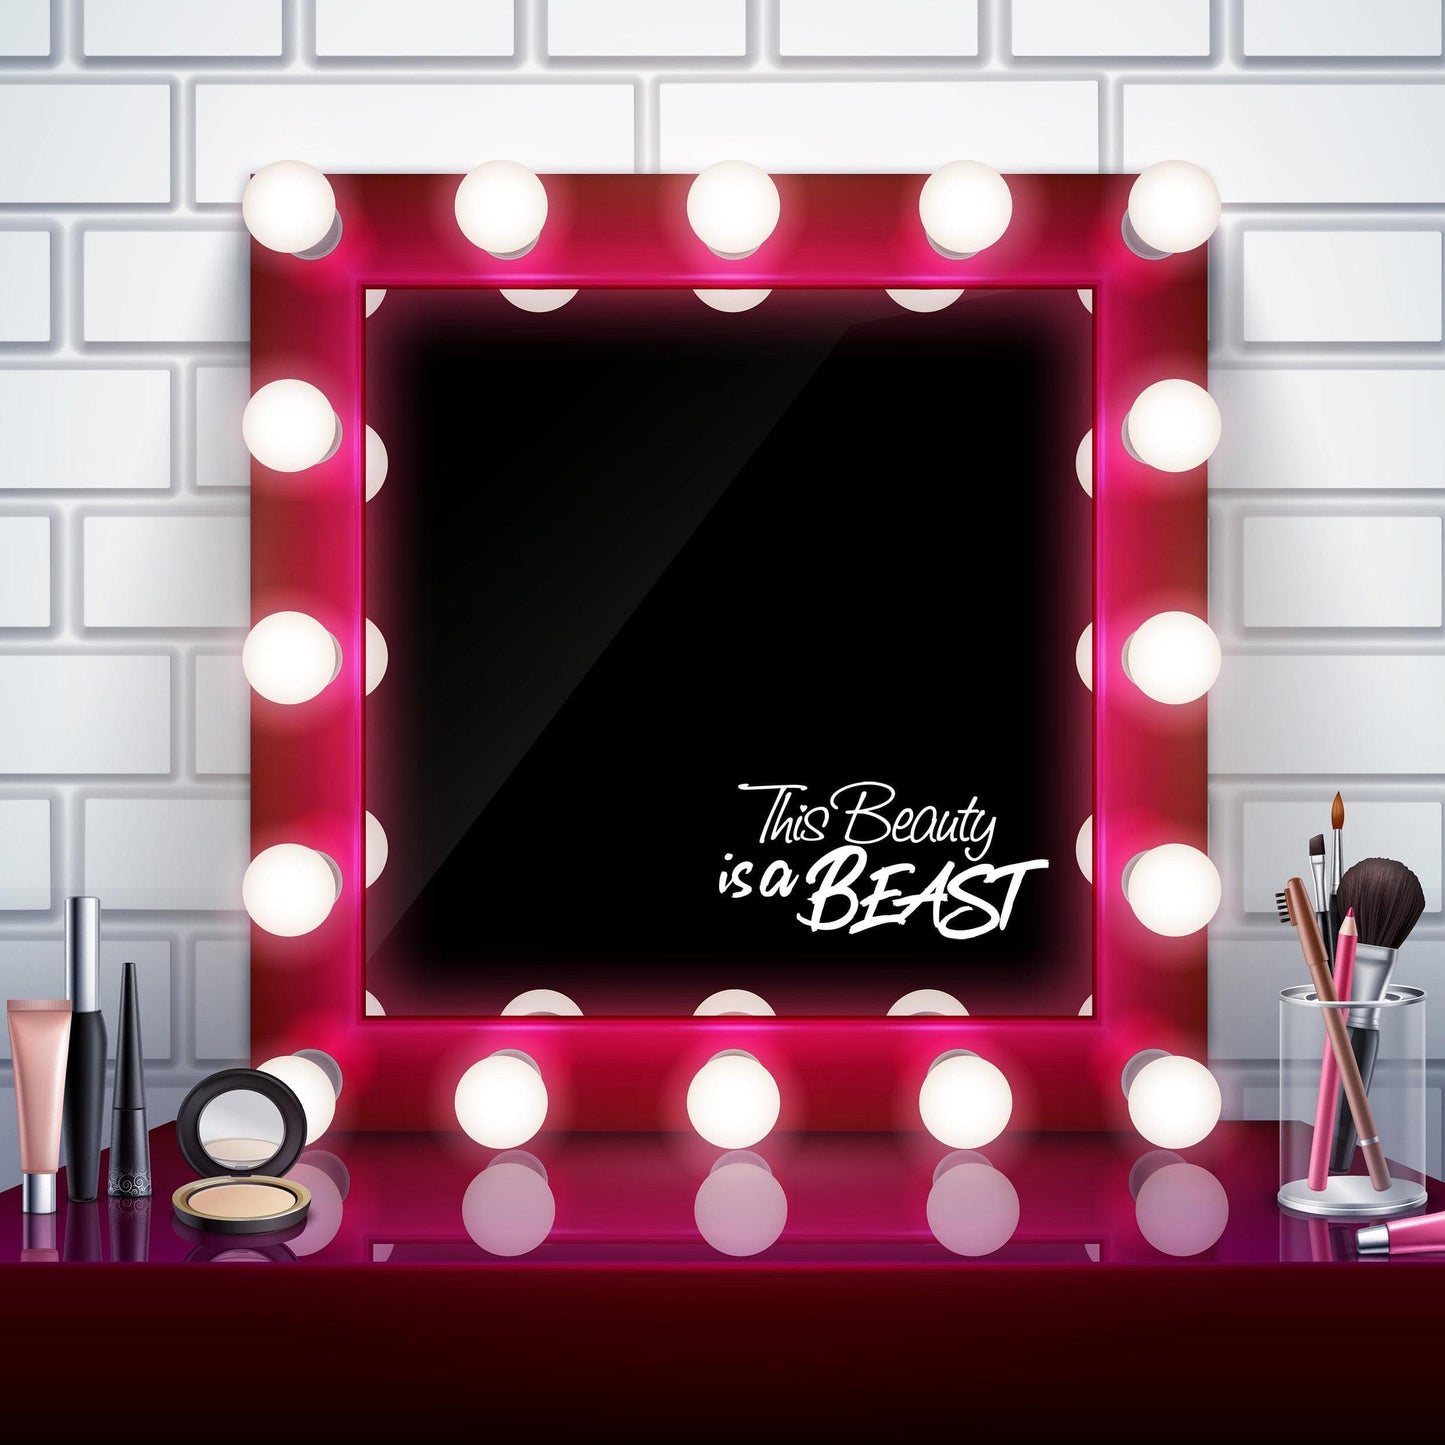 This Beauty is a Beast Motivational Self-Esteem Quote Vinyl Decal Sticker for Mirrors or Walls. Boost your Self-Confidence with Positive Thinking. #6280